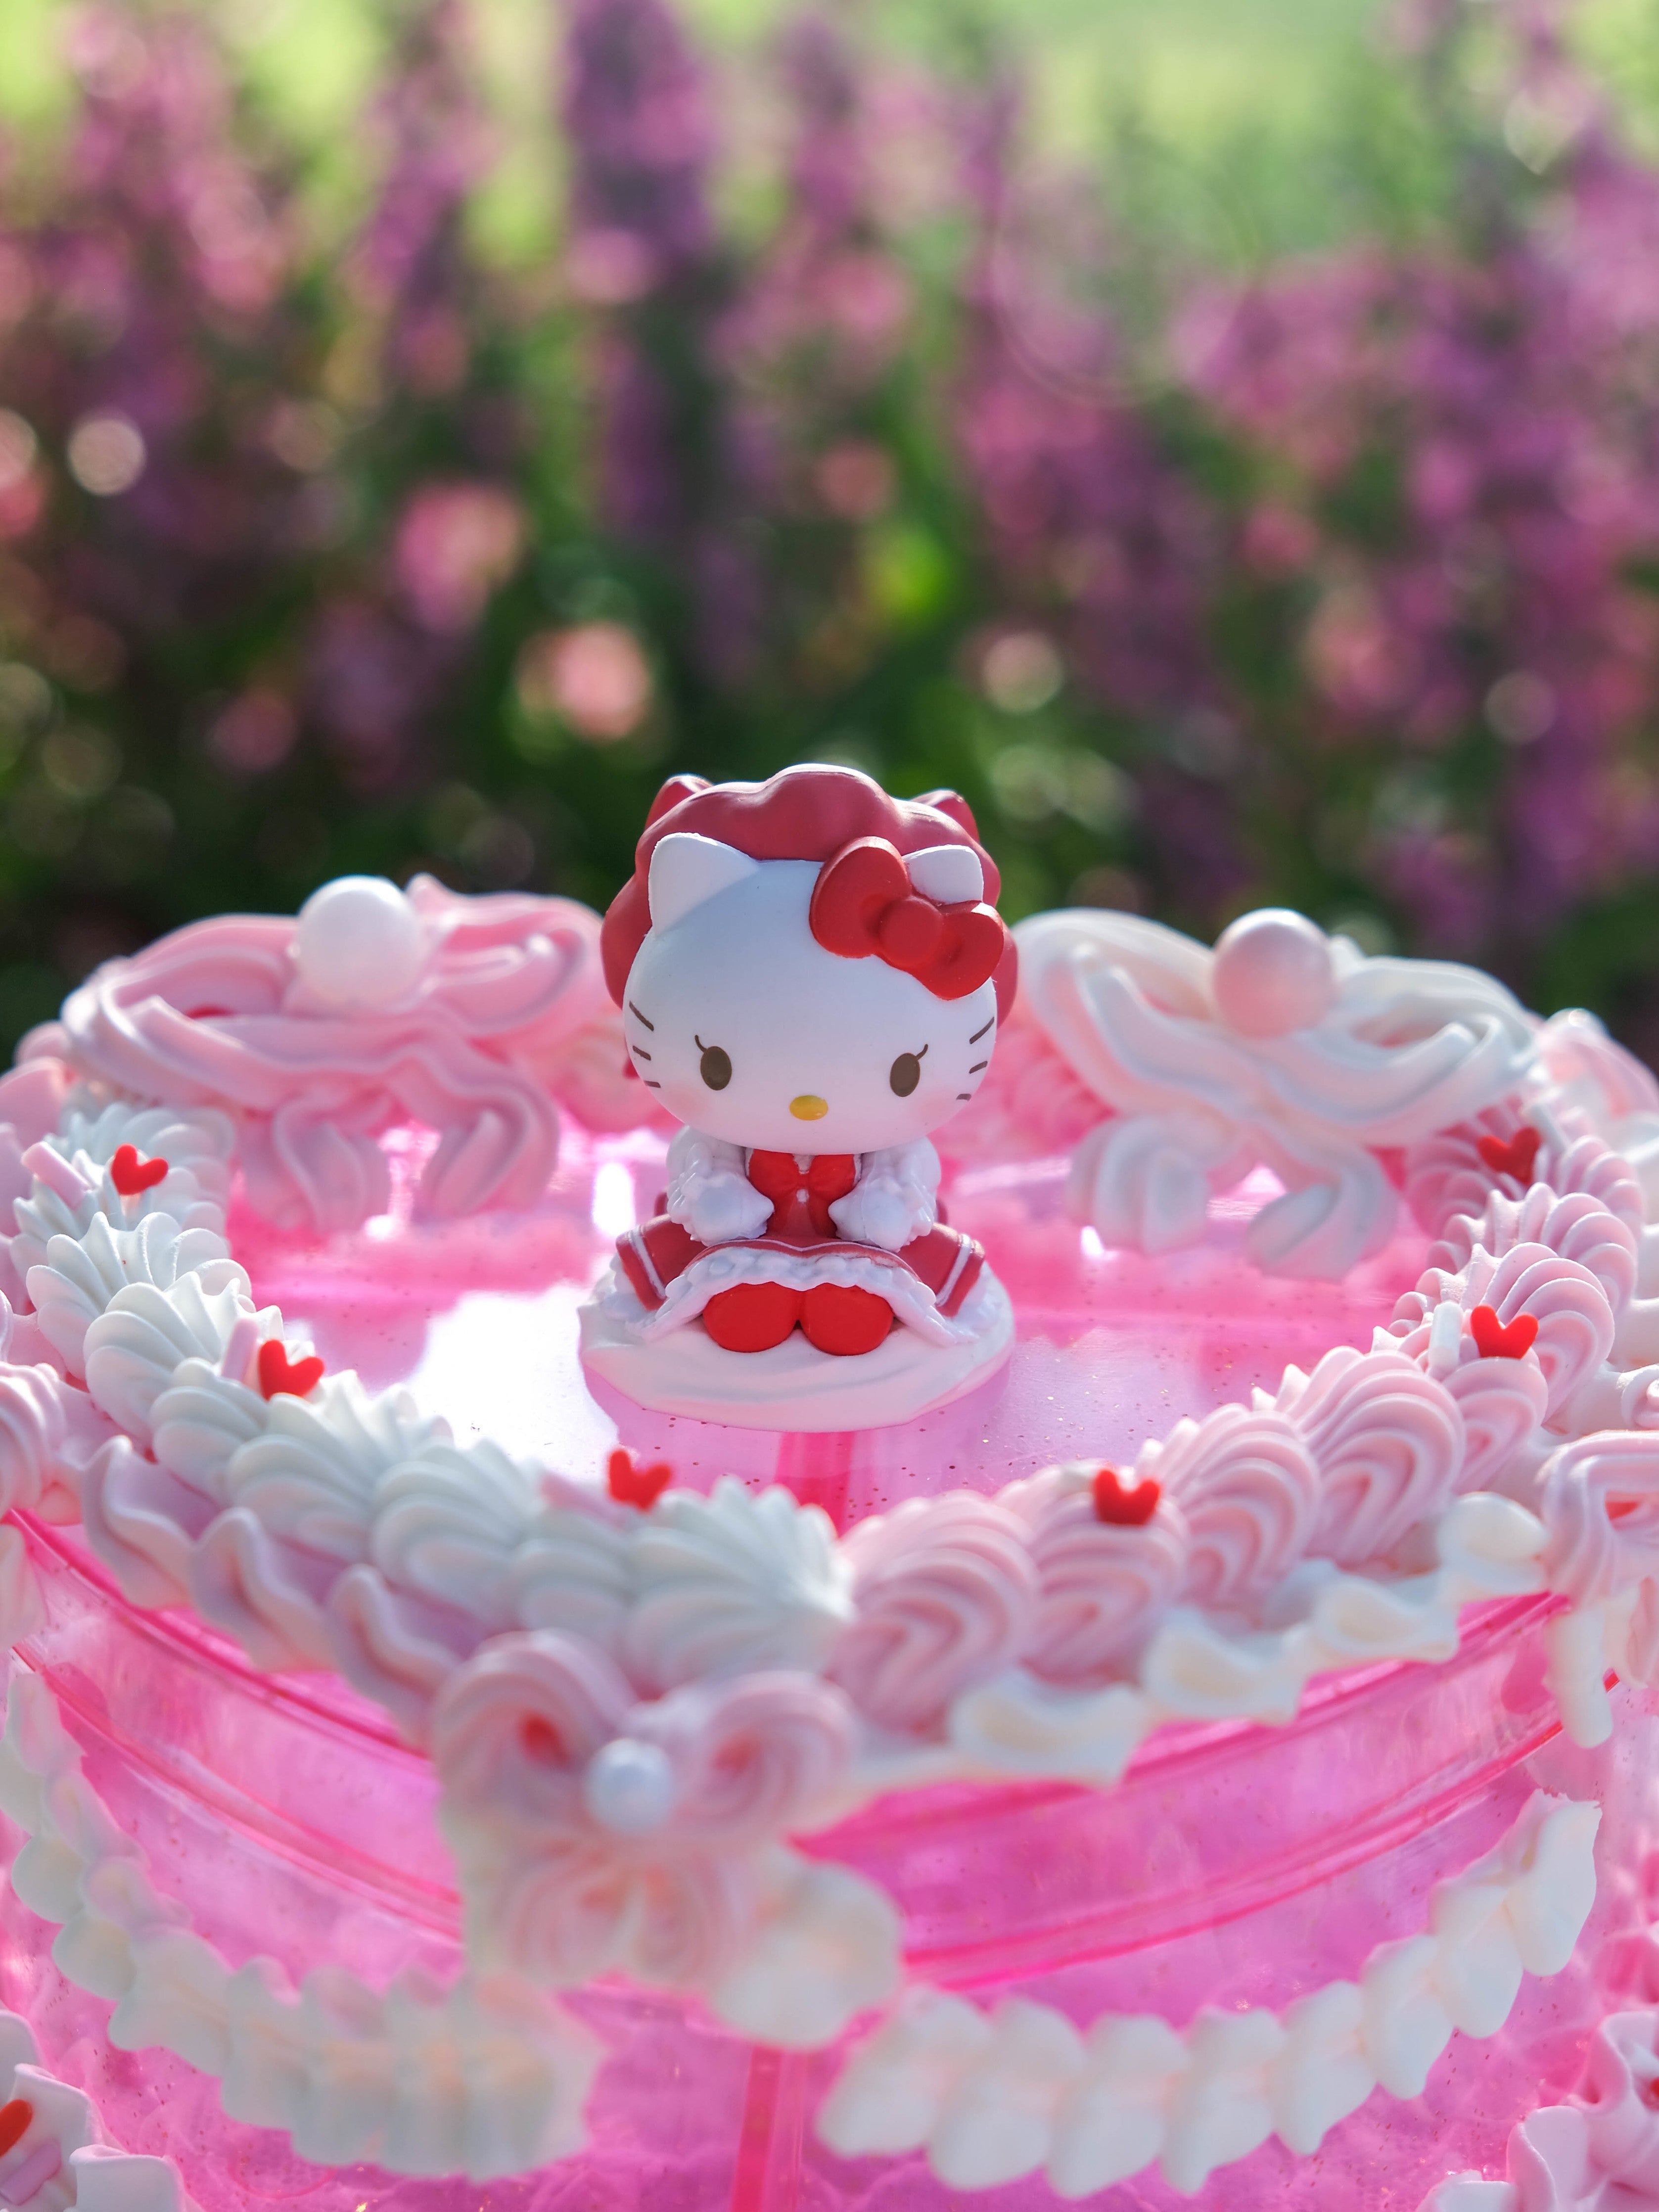 Buy Hello Kitty Cake Topper Online in India - Etsy